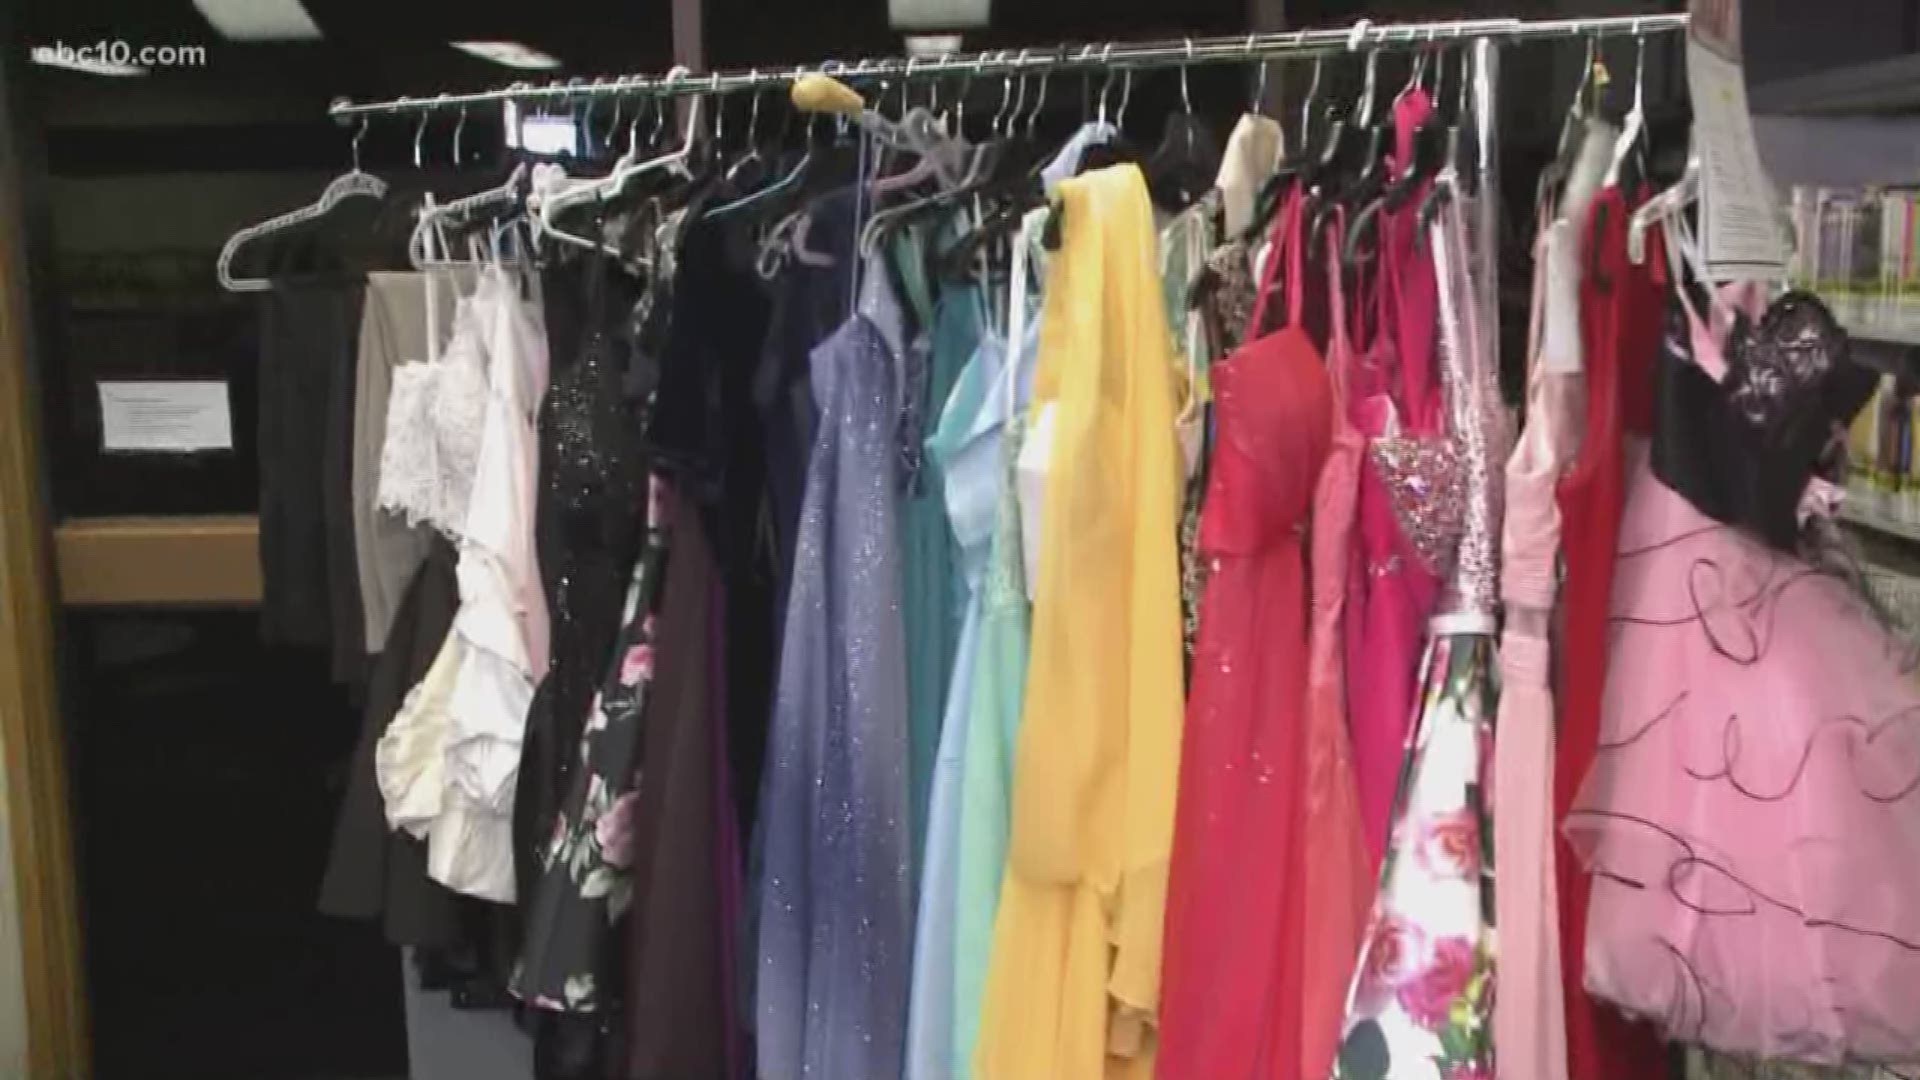 The Sacramento Public Library wants to help teenagers have a magical prom night, minus the extravagant price tag. That and more on your Daily Blend of weather, traffic and headlines.